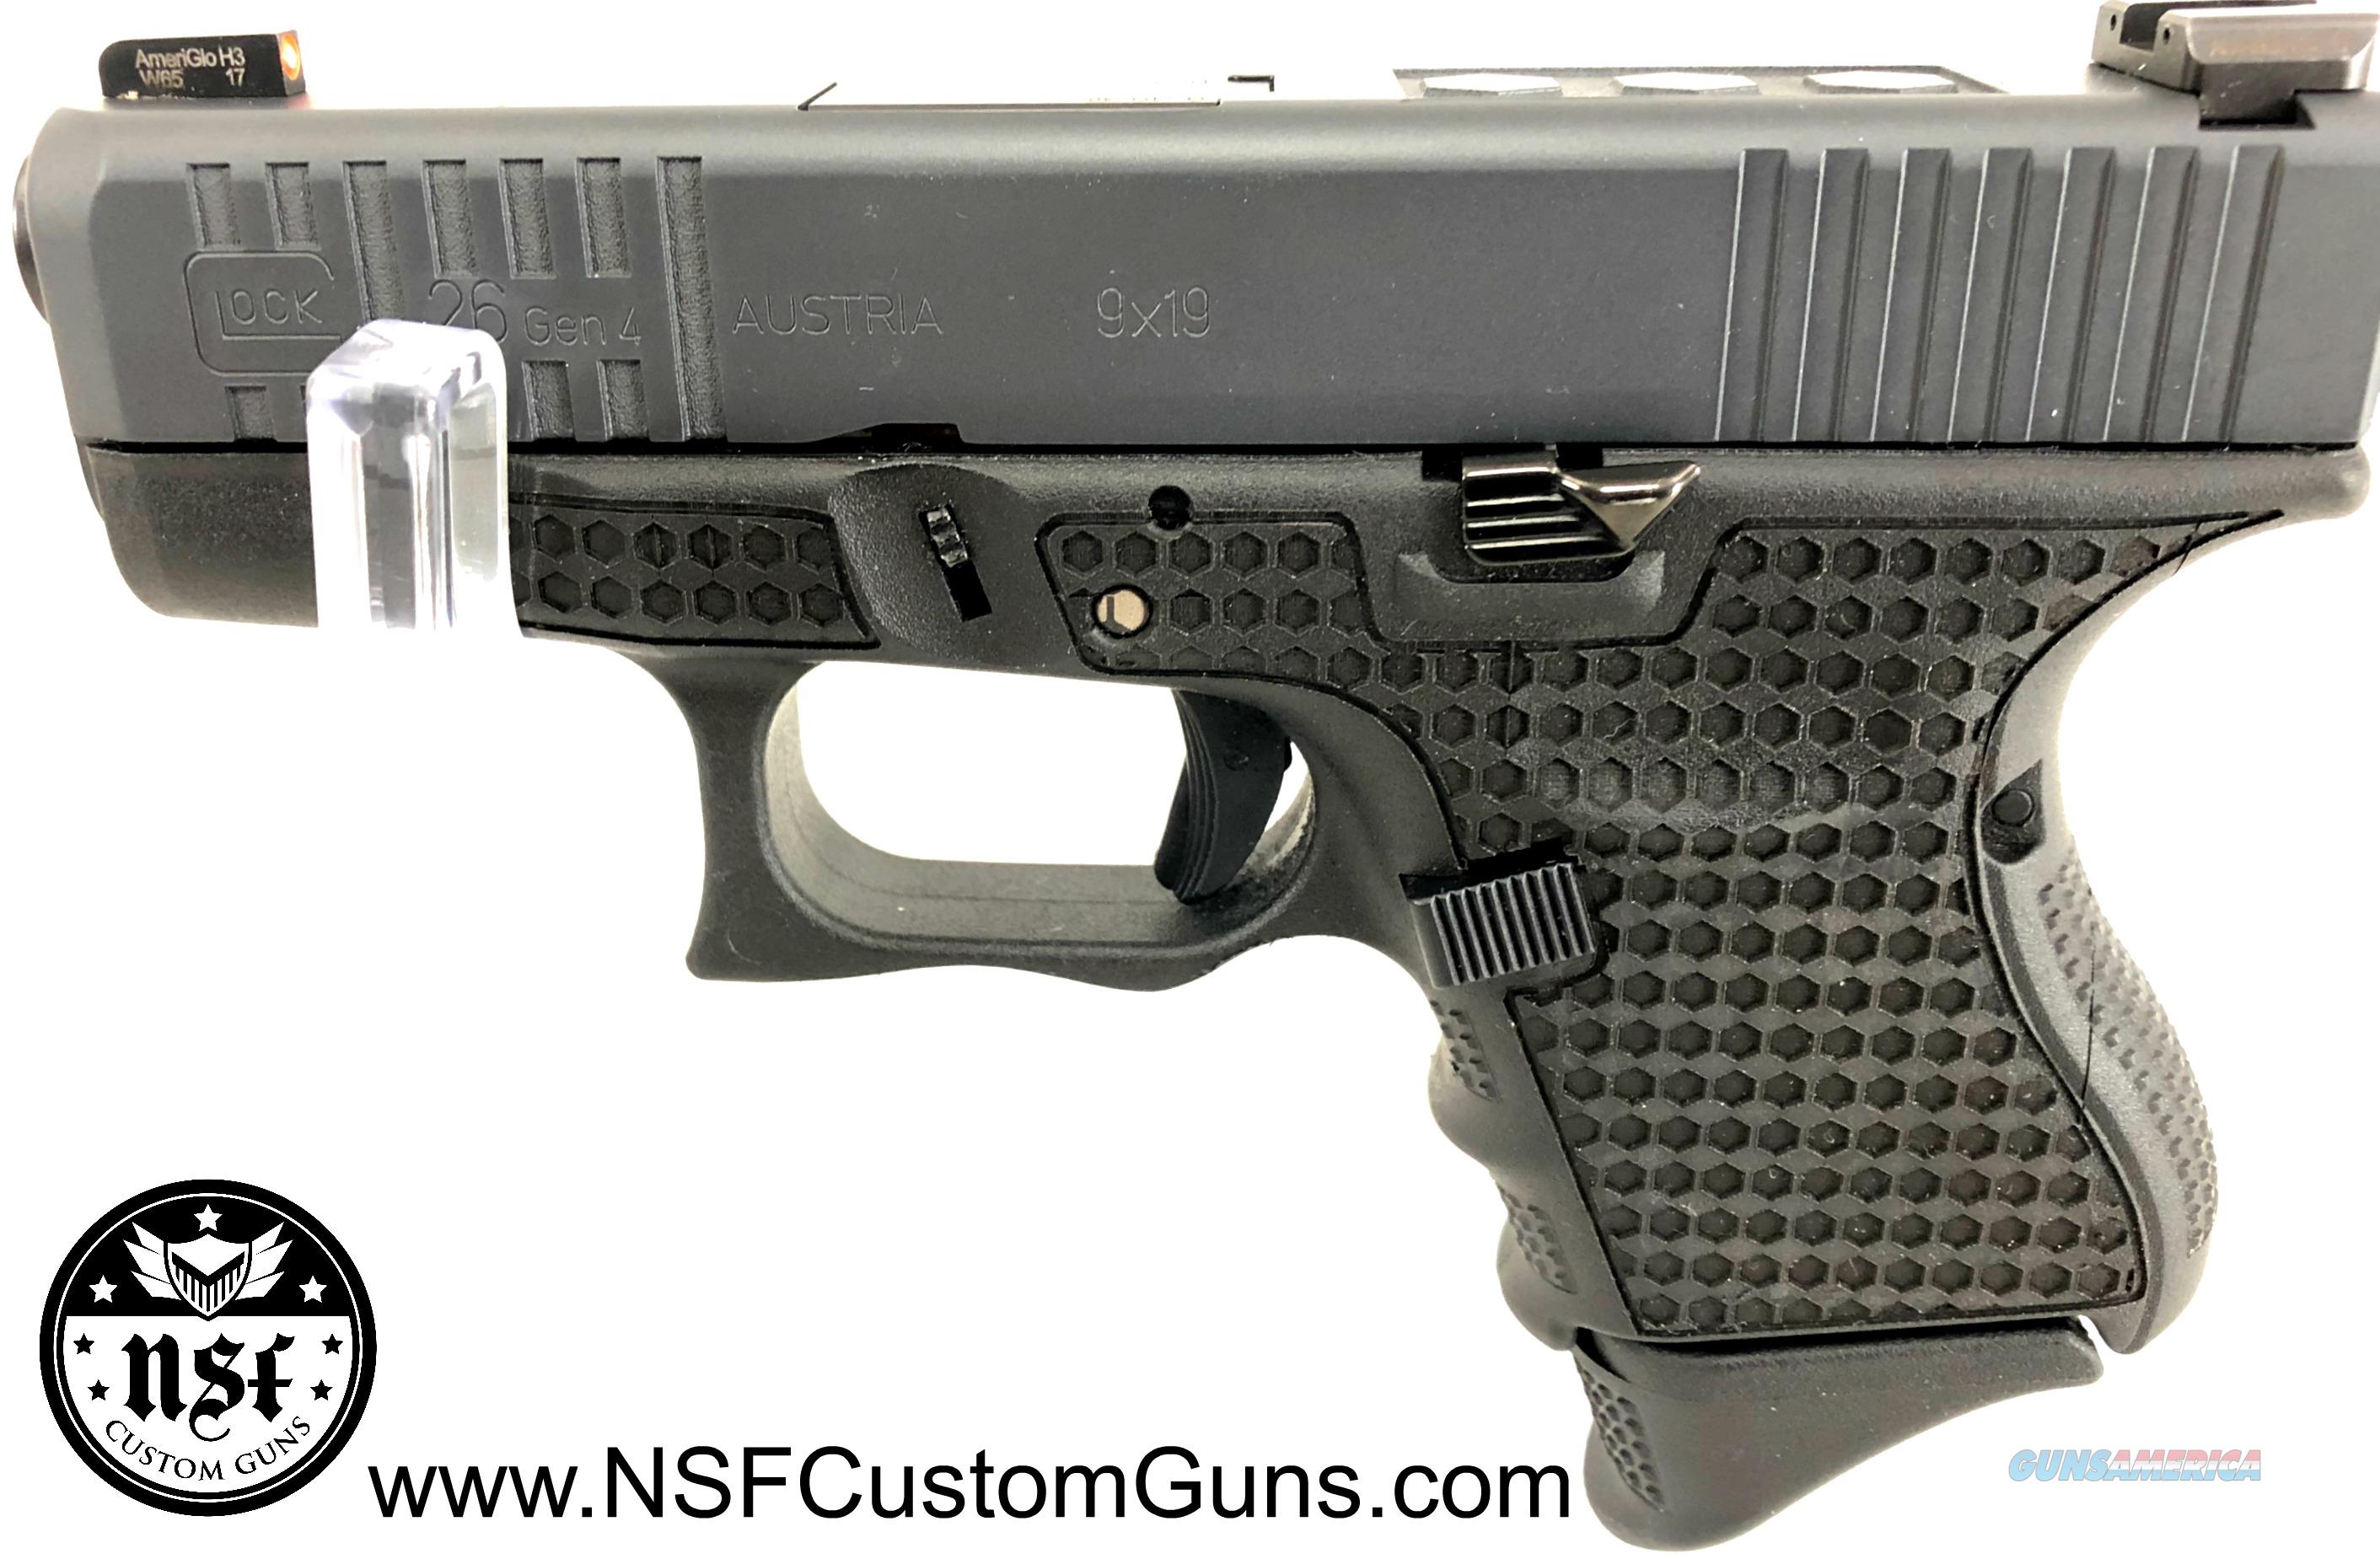 Barely Used 9 Mm Glock Sub Compact G26 Gen 4 Laser Stippling Front Serrations Double Undercut H3 Sights